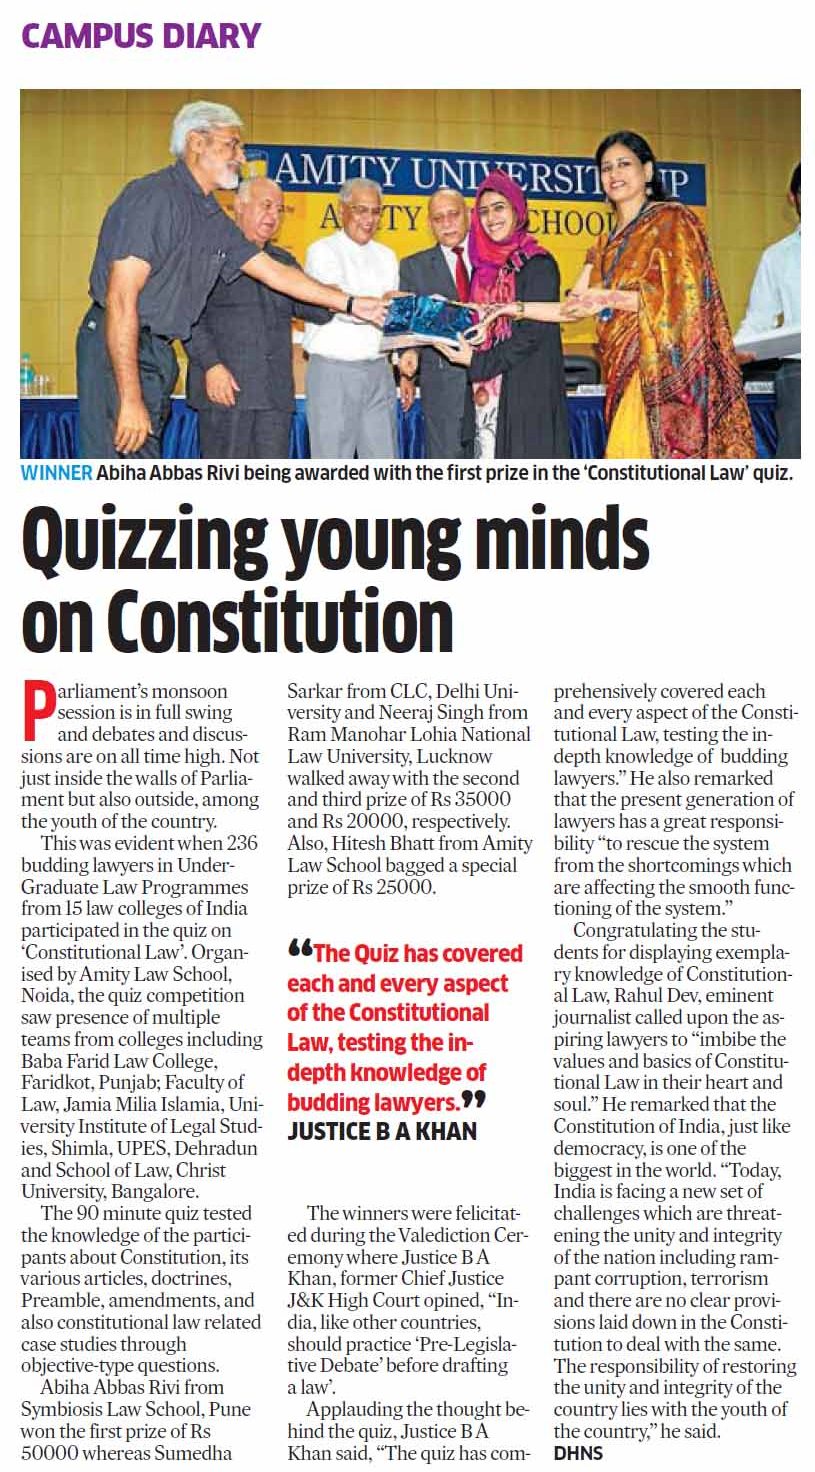 Quizzing young minds on Constitution -Amity Law School, Noida organised QUIZ on Constitutional Law